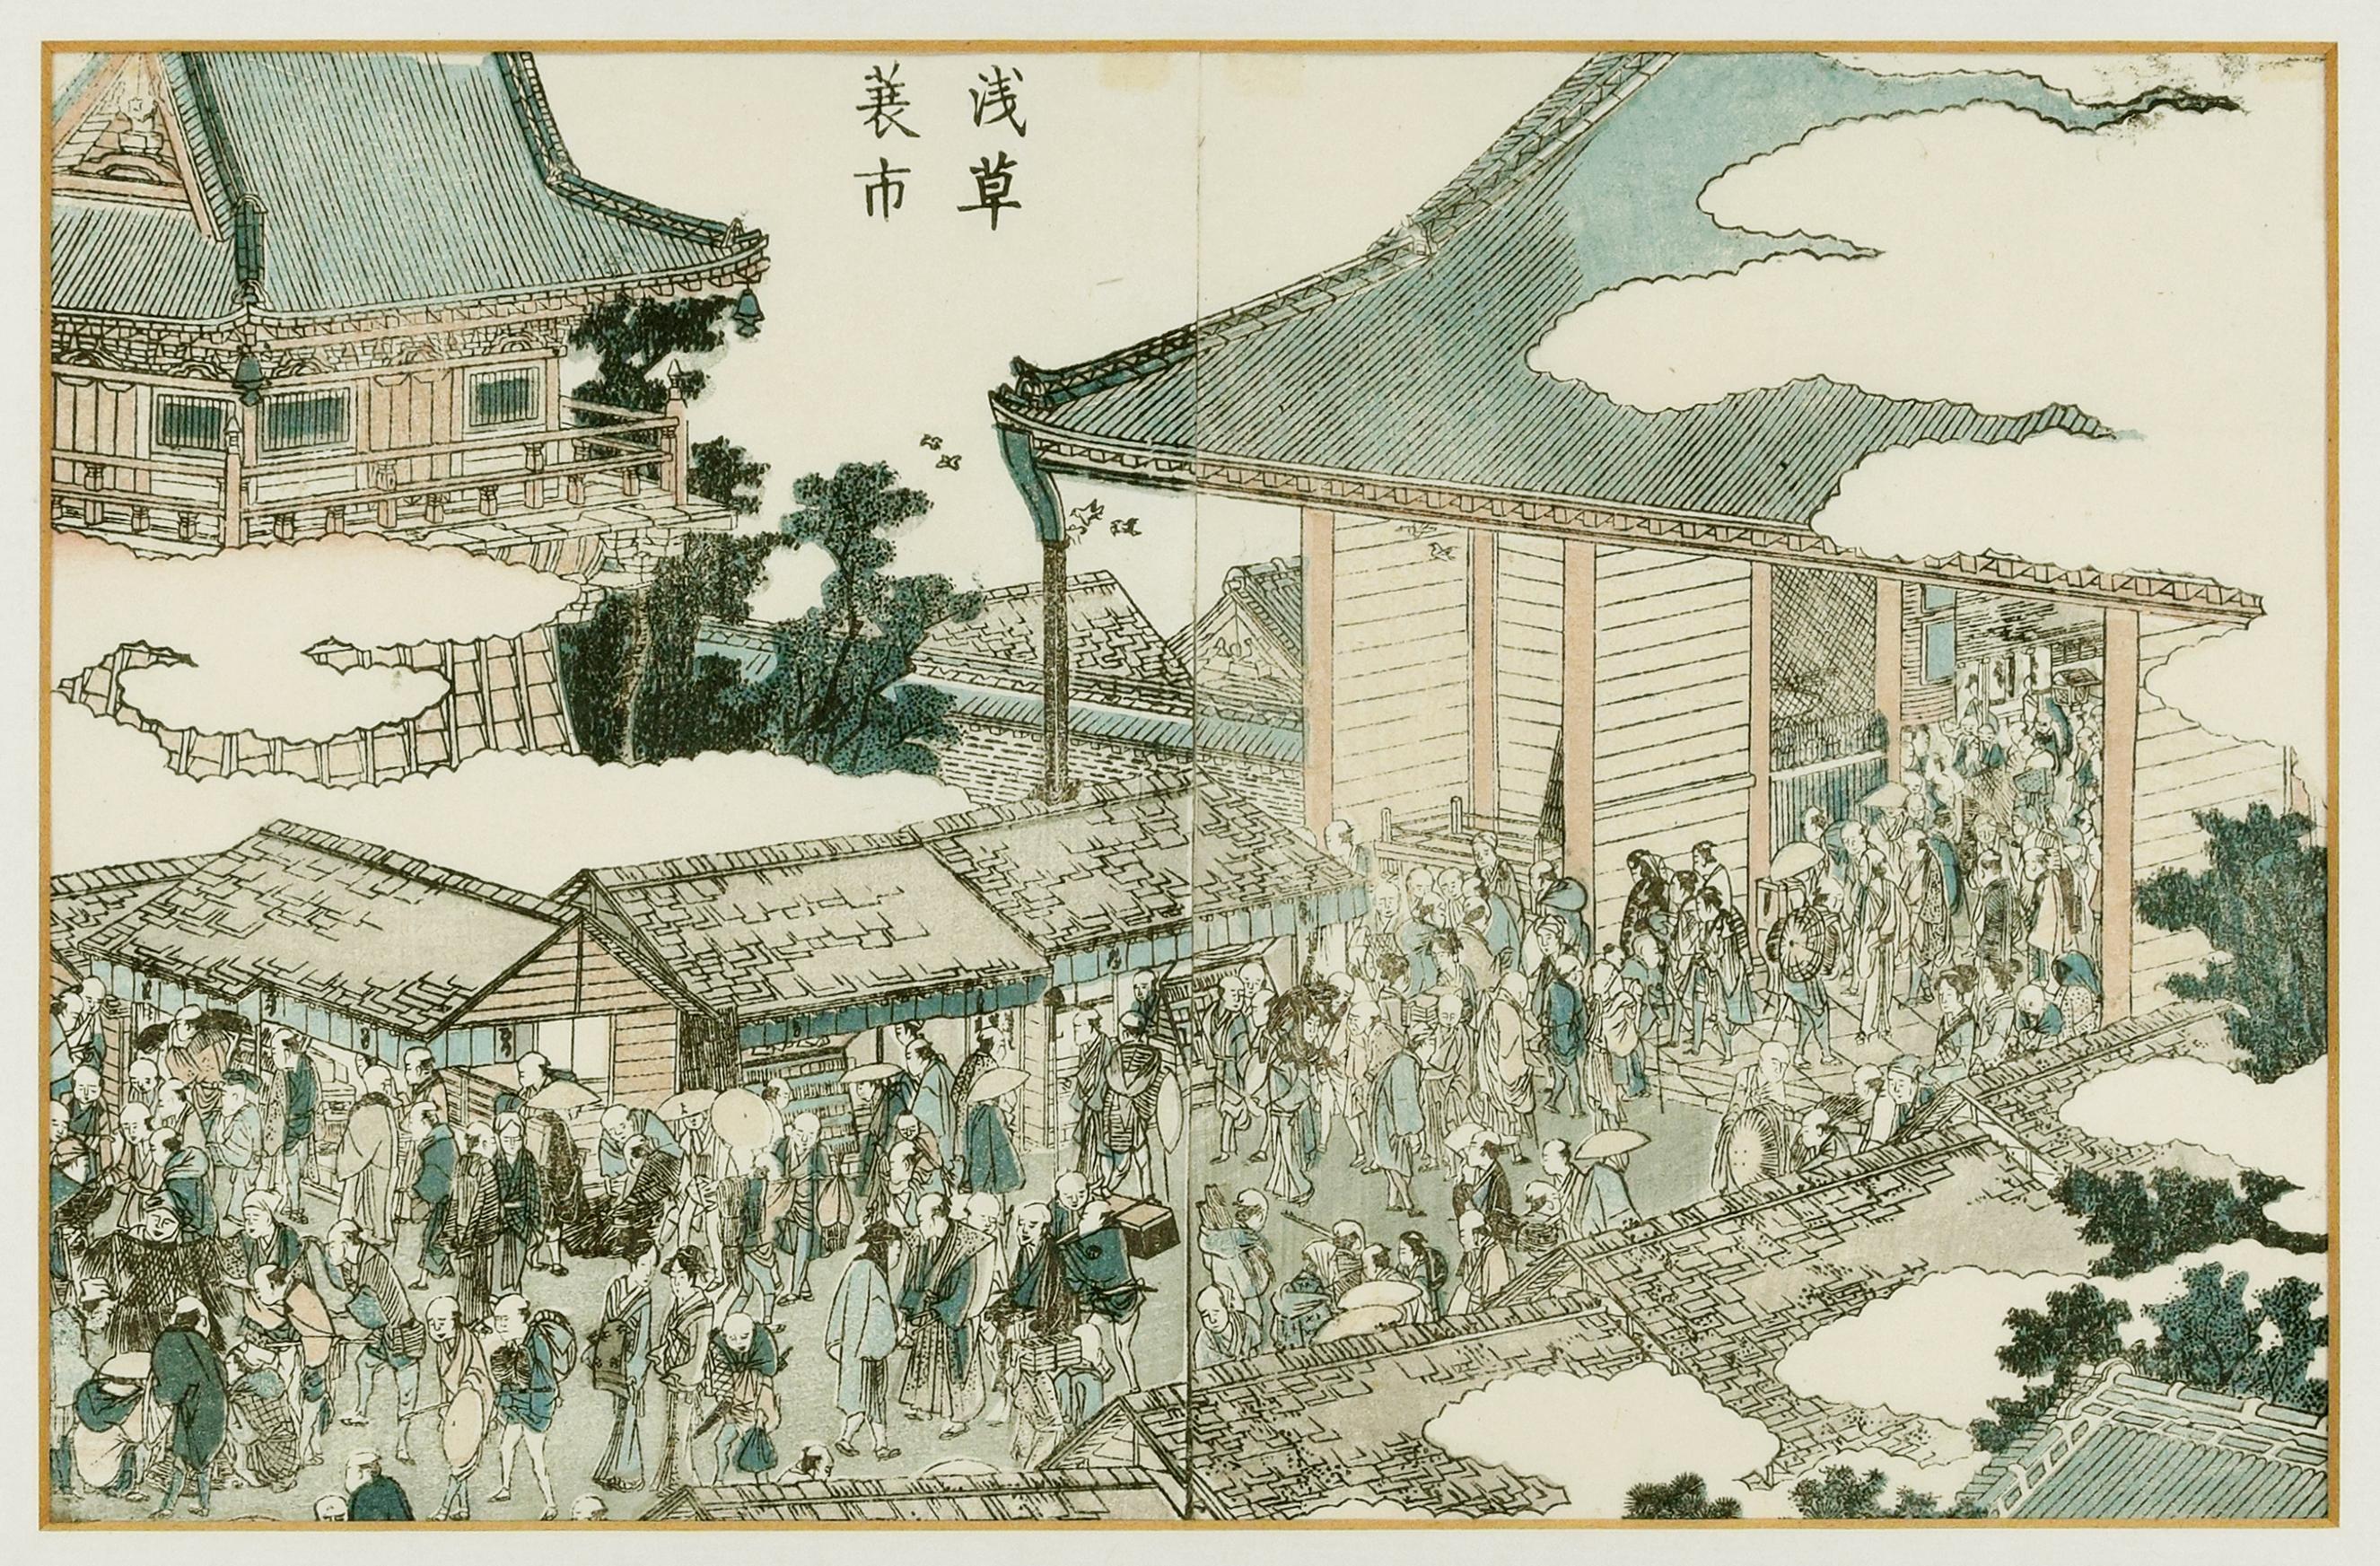 View of Asakusa is a beautiful colored woodblock original print realized around 1802 by the Japanese master, Katsushika Hokusai (1760-1849) With an inscription on plate on higher margin at the center.

Representing a famous view of the Easter